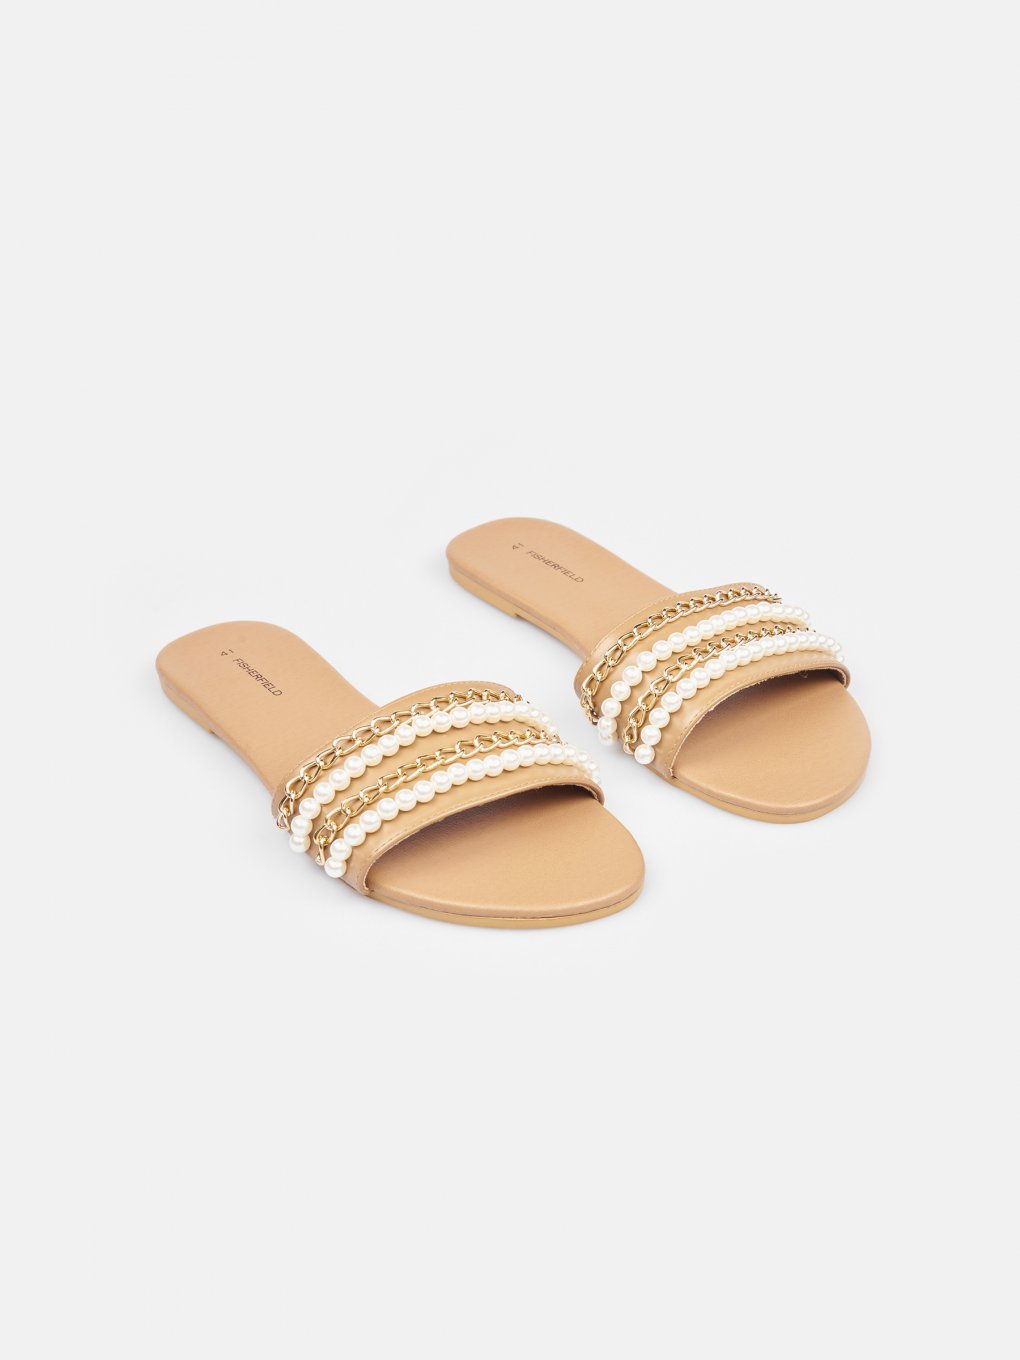 Slides with pearls